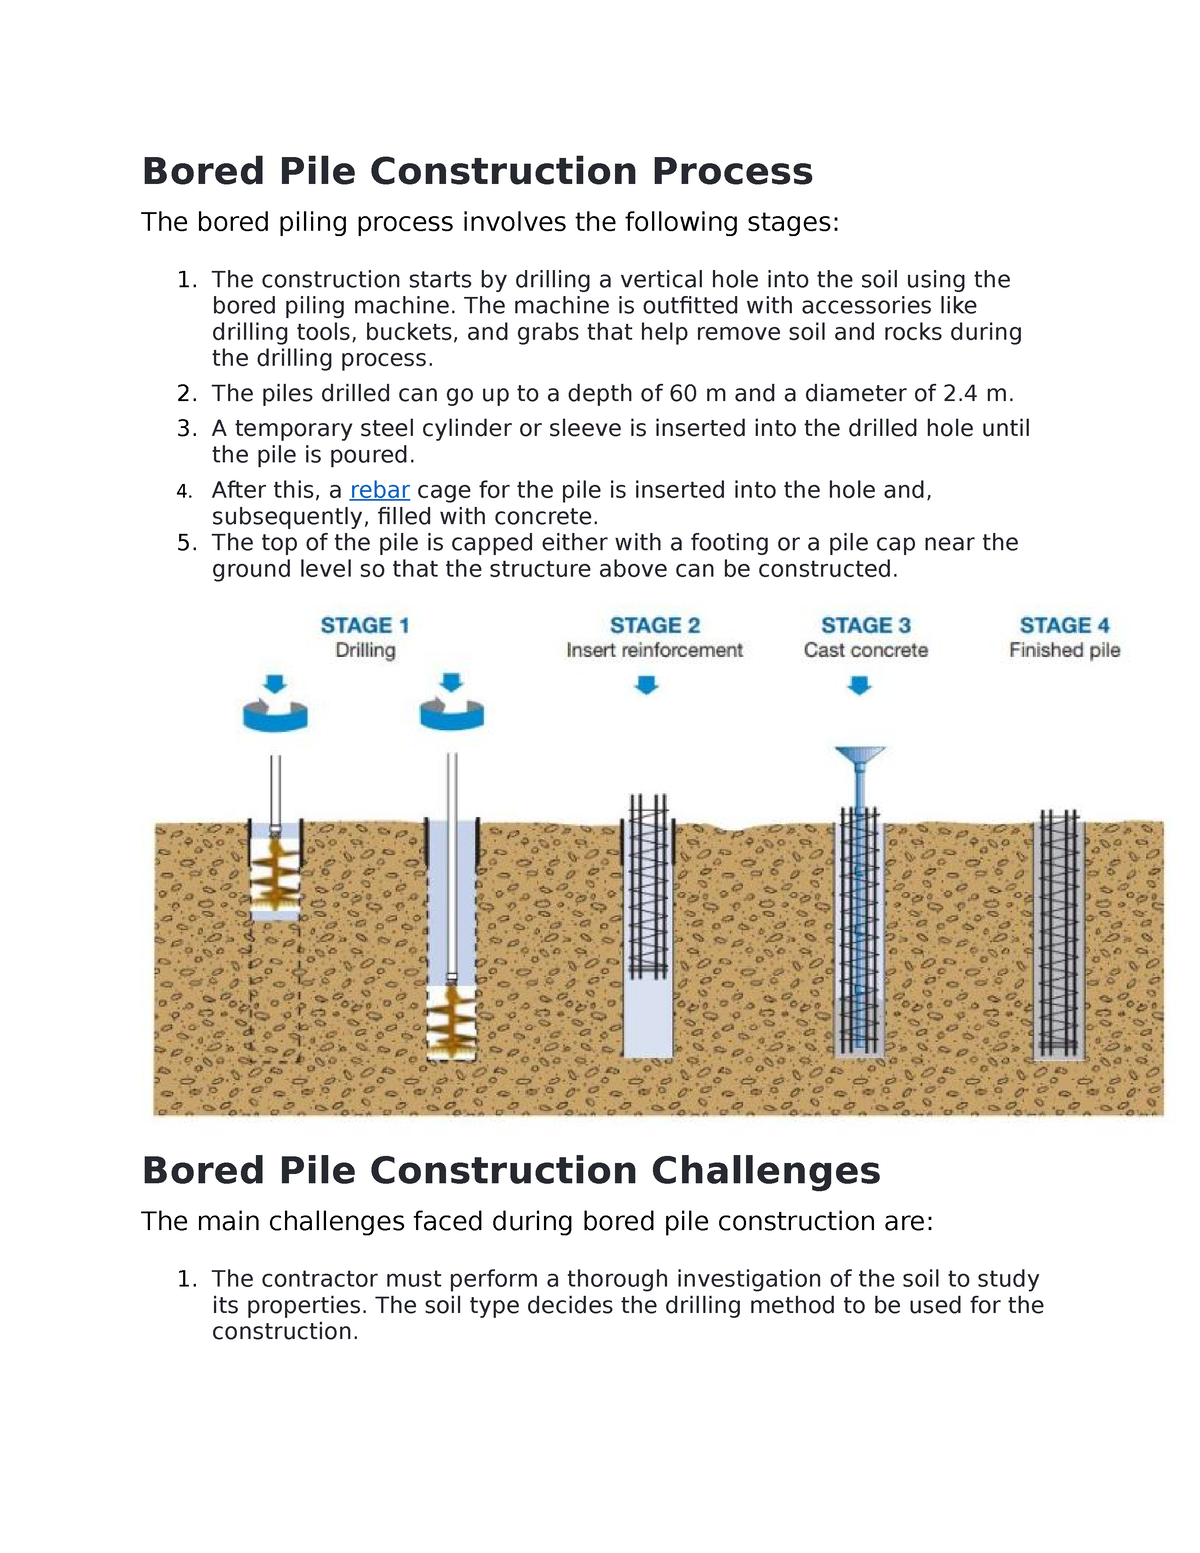 How to Construct a Bored Pile Foundation? - The Constructor